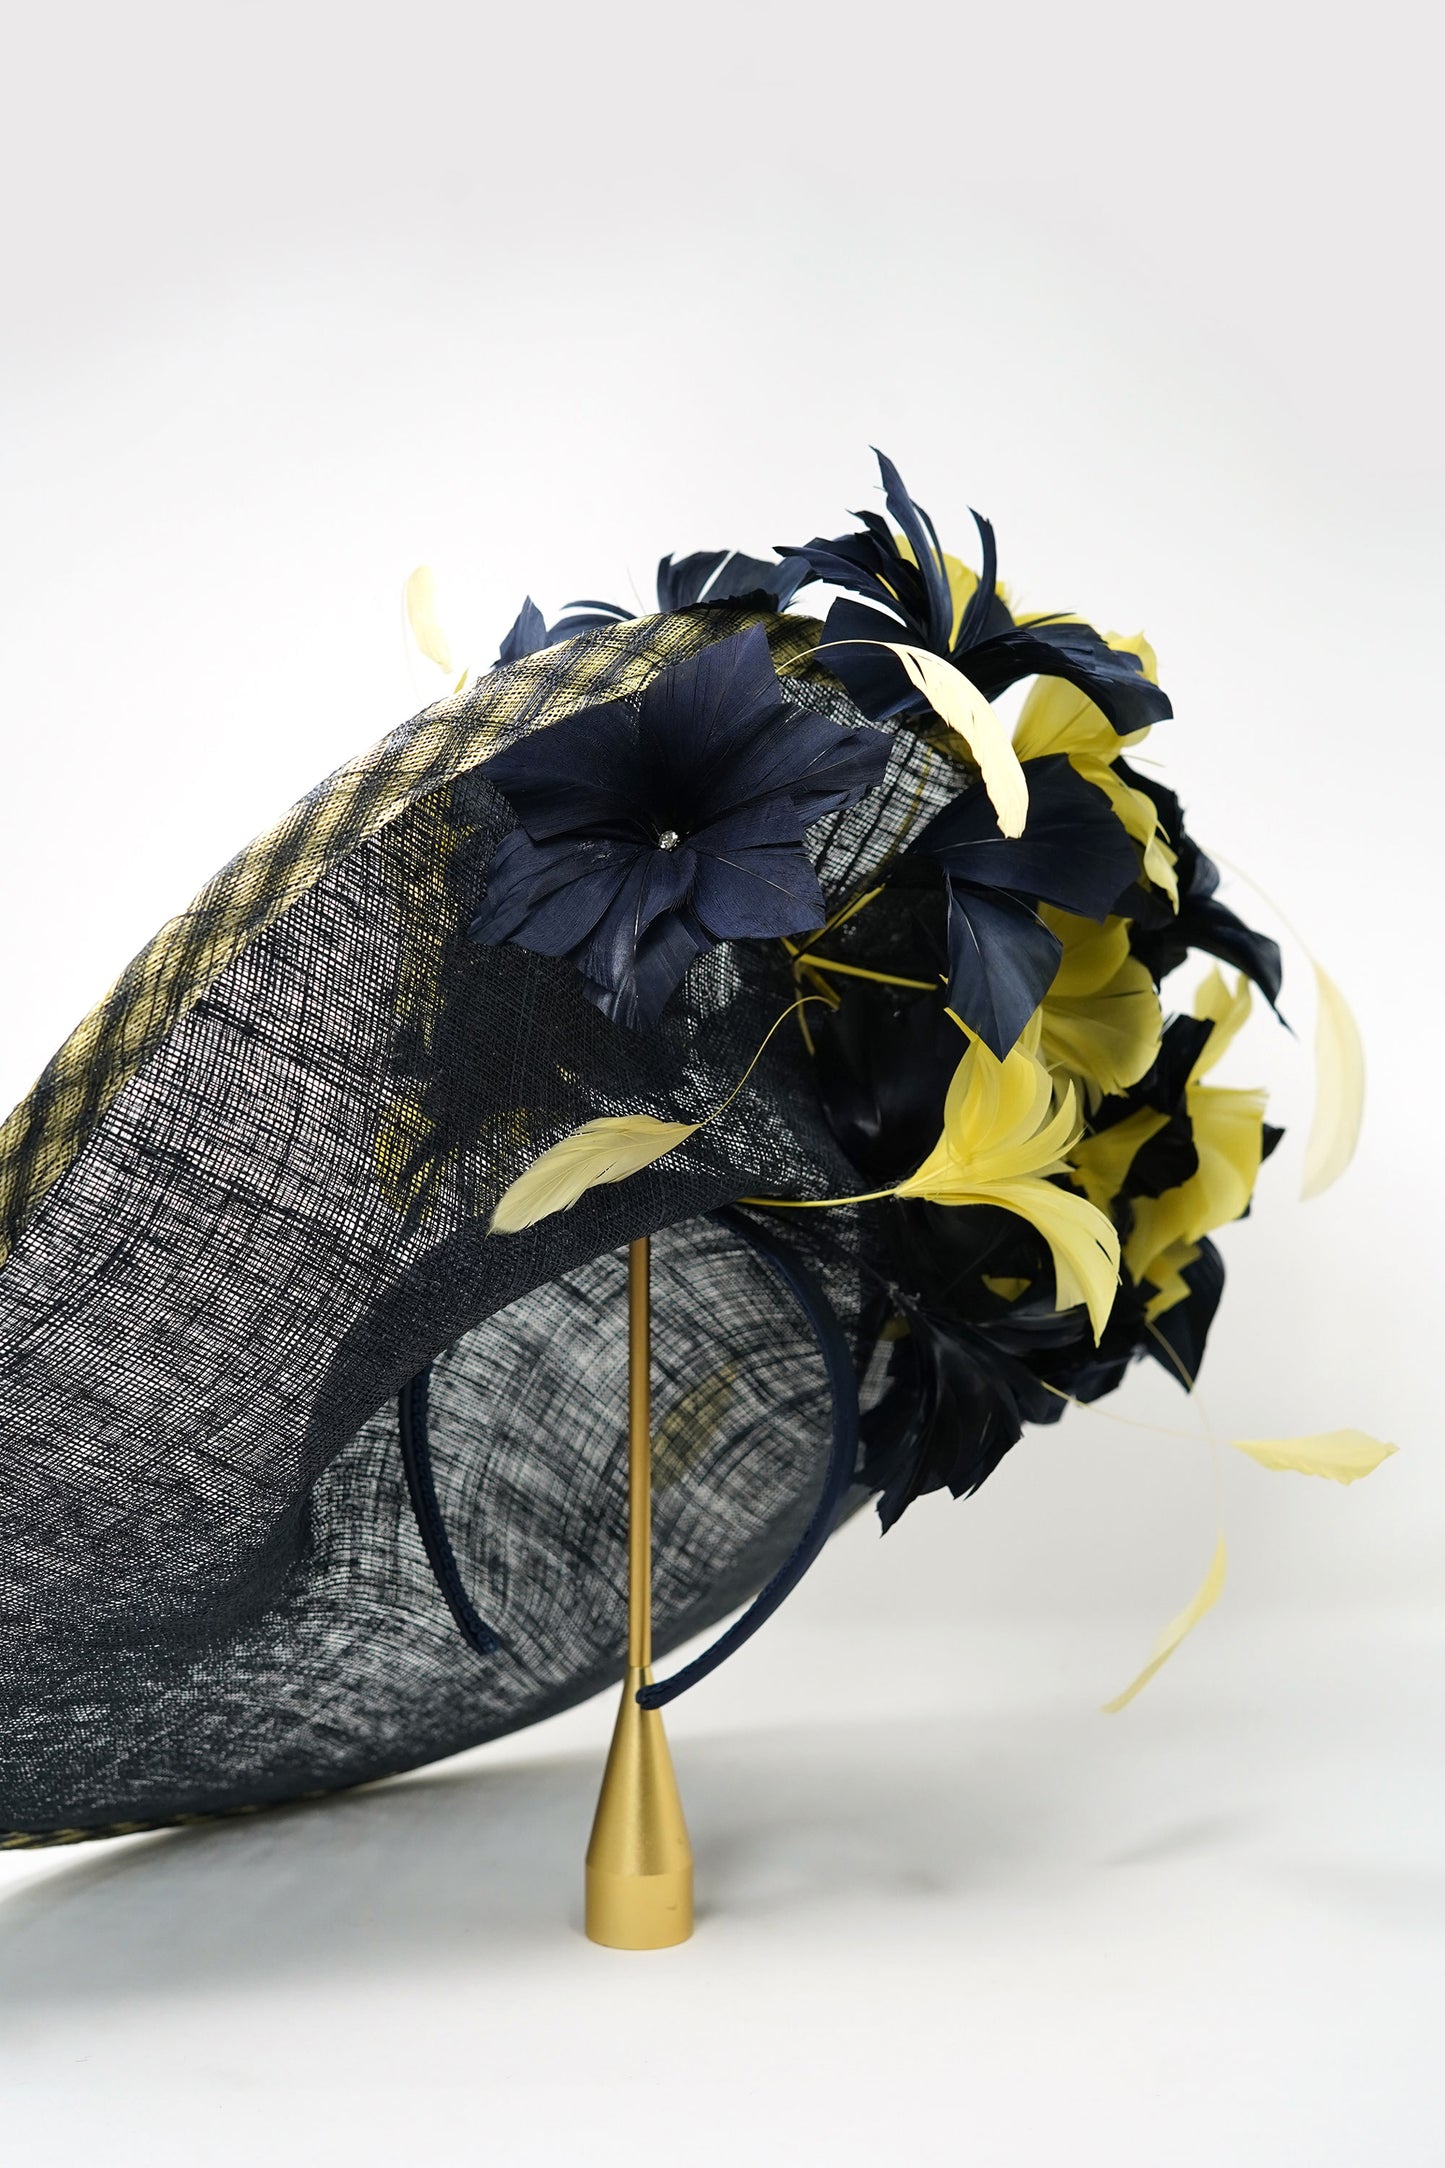 Gail Blue and Yellow Fascinator